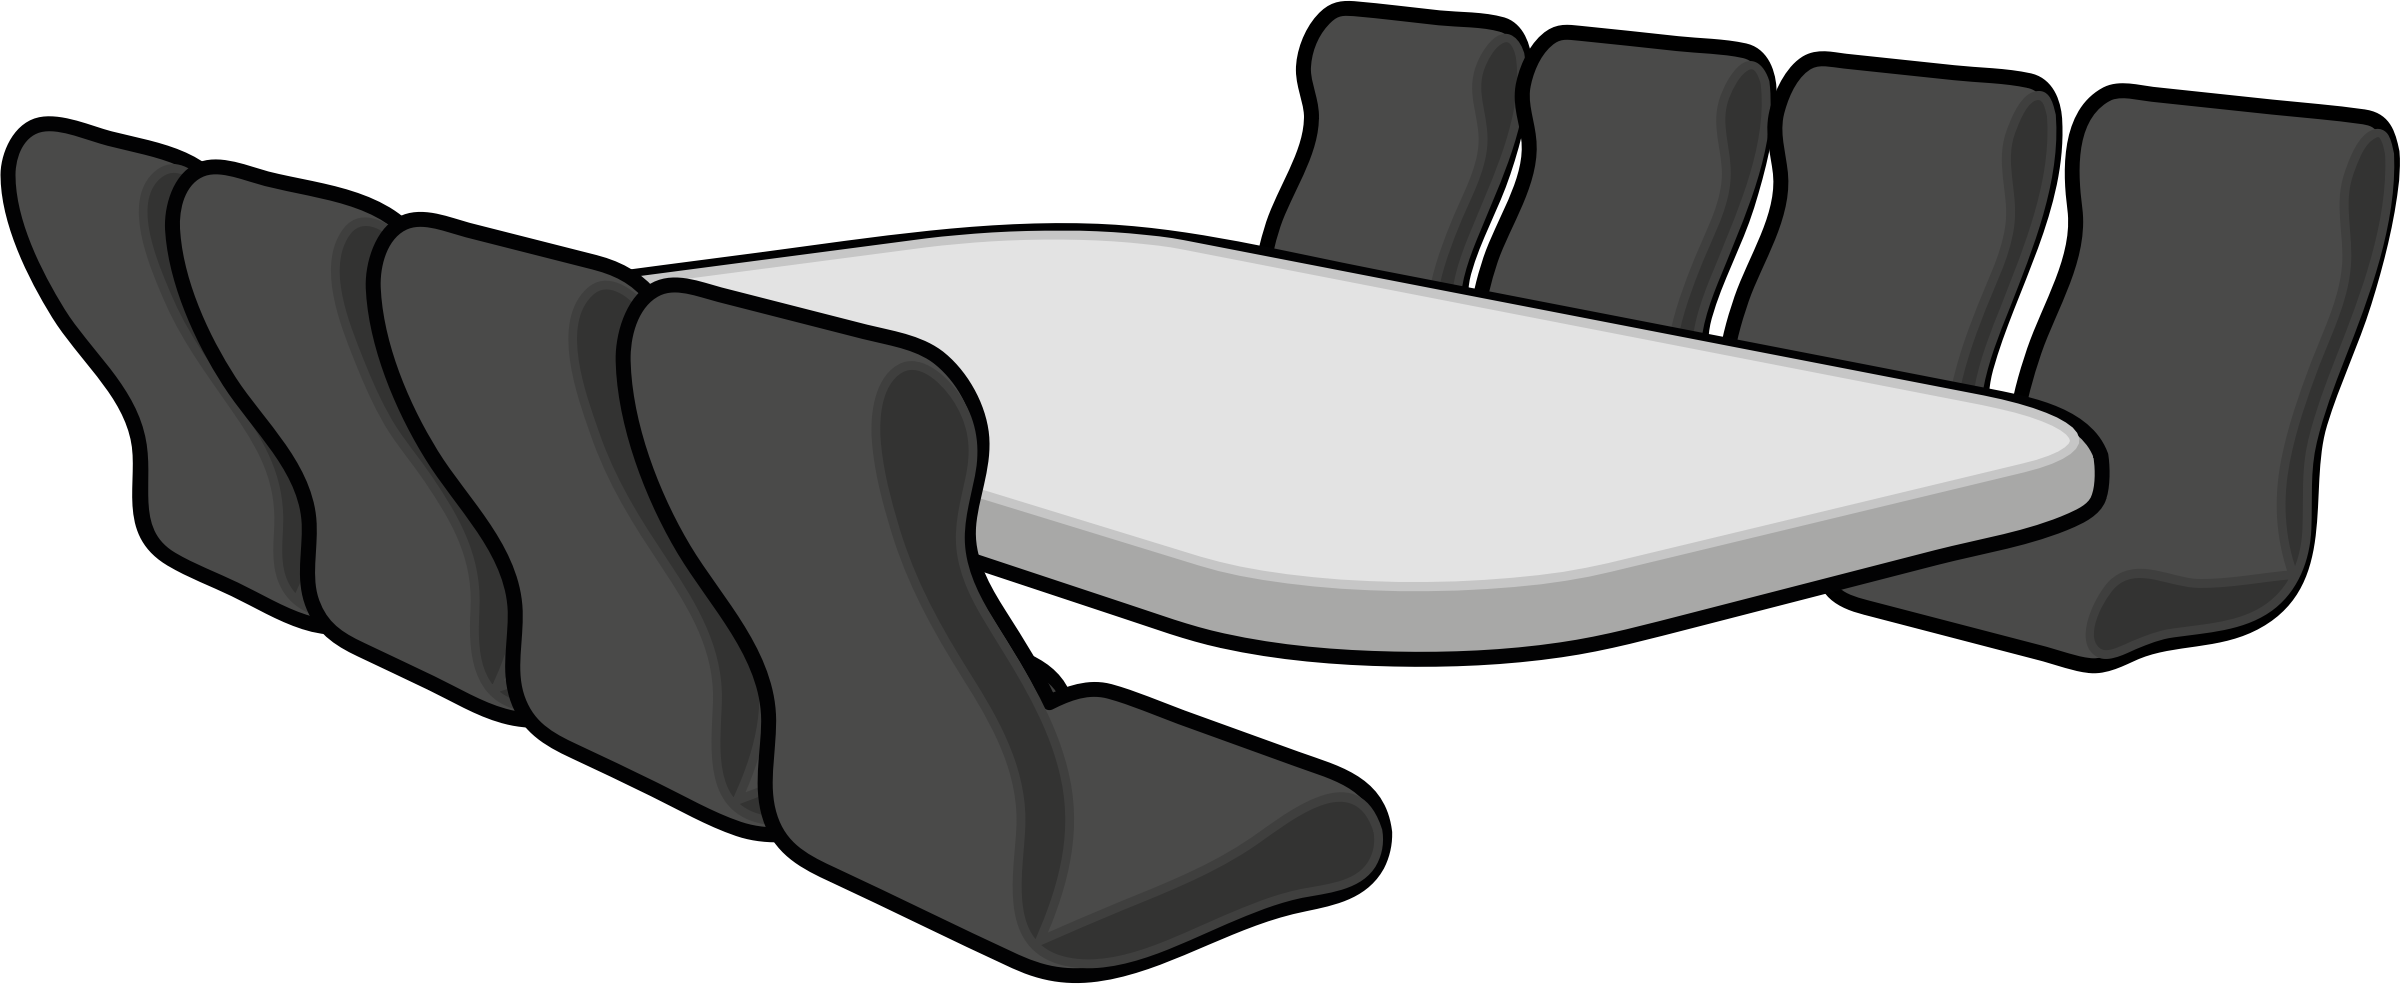 conference room clipart free - photo #46